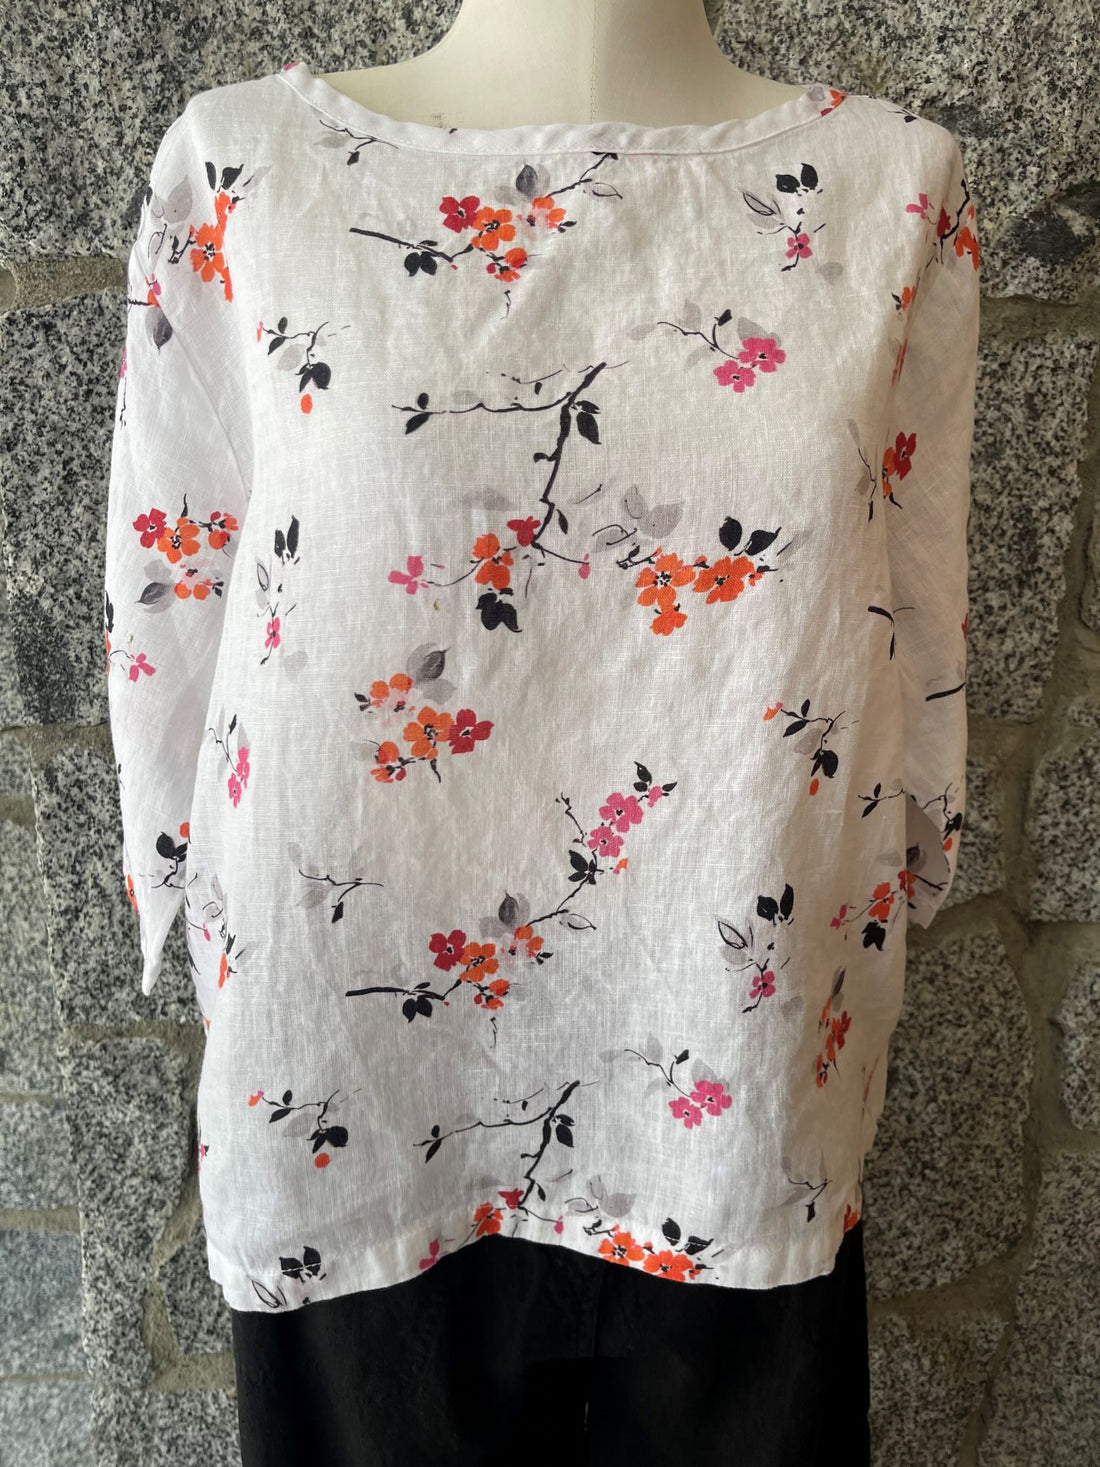 Cut Loose - Linen Elbow Sleeves Top - Cherry Blossom White